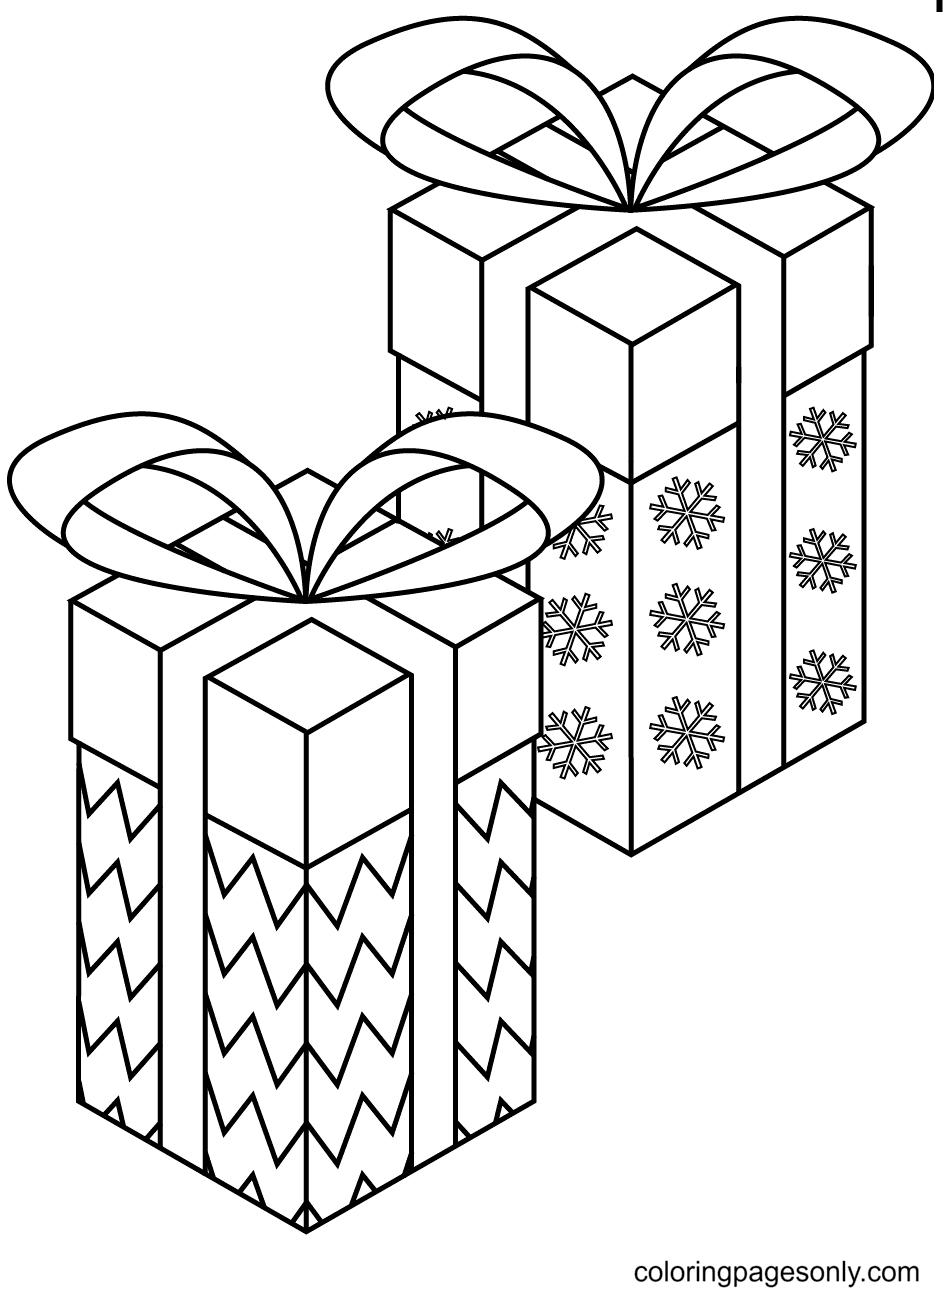 Lovely Christmas Gifts Coloring Page